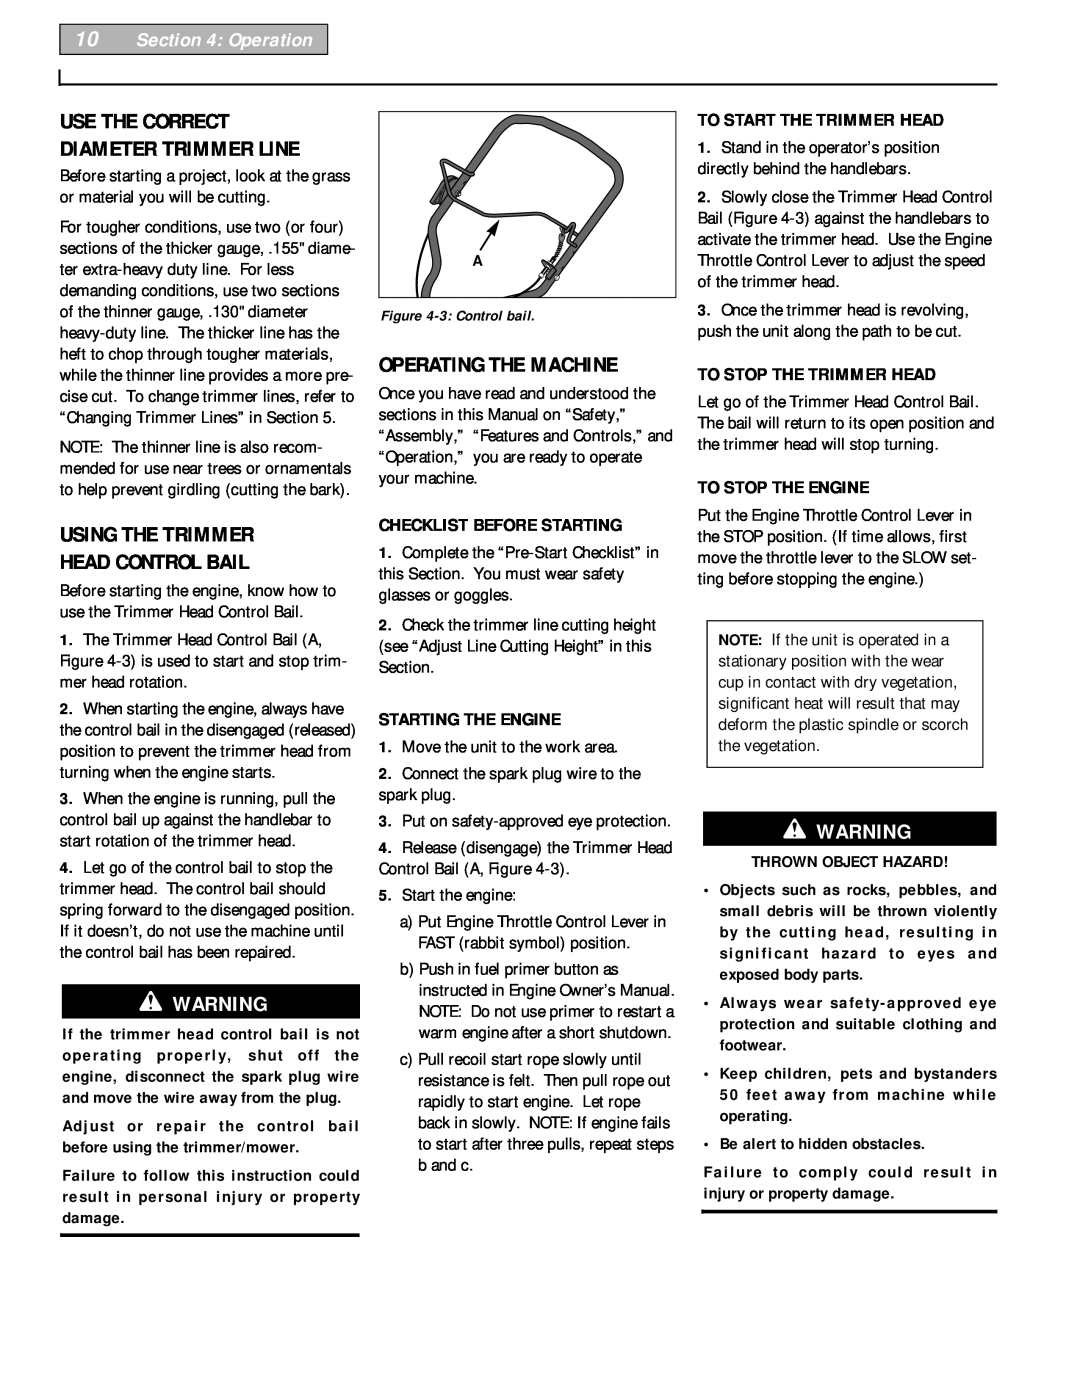 Troy-Bilt 52065 owner manual Operating The Machine, Using The Trimmer Head Control Bail, Operation, Thrown Object Hazard 